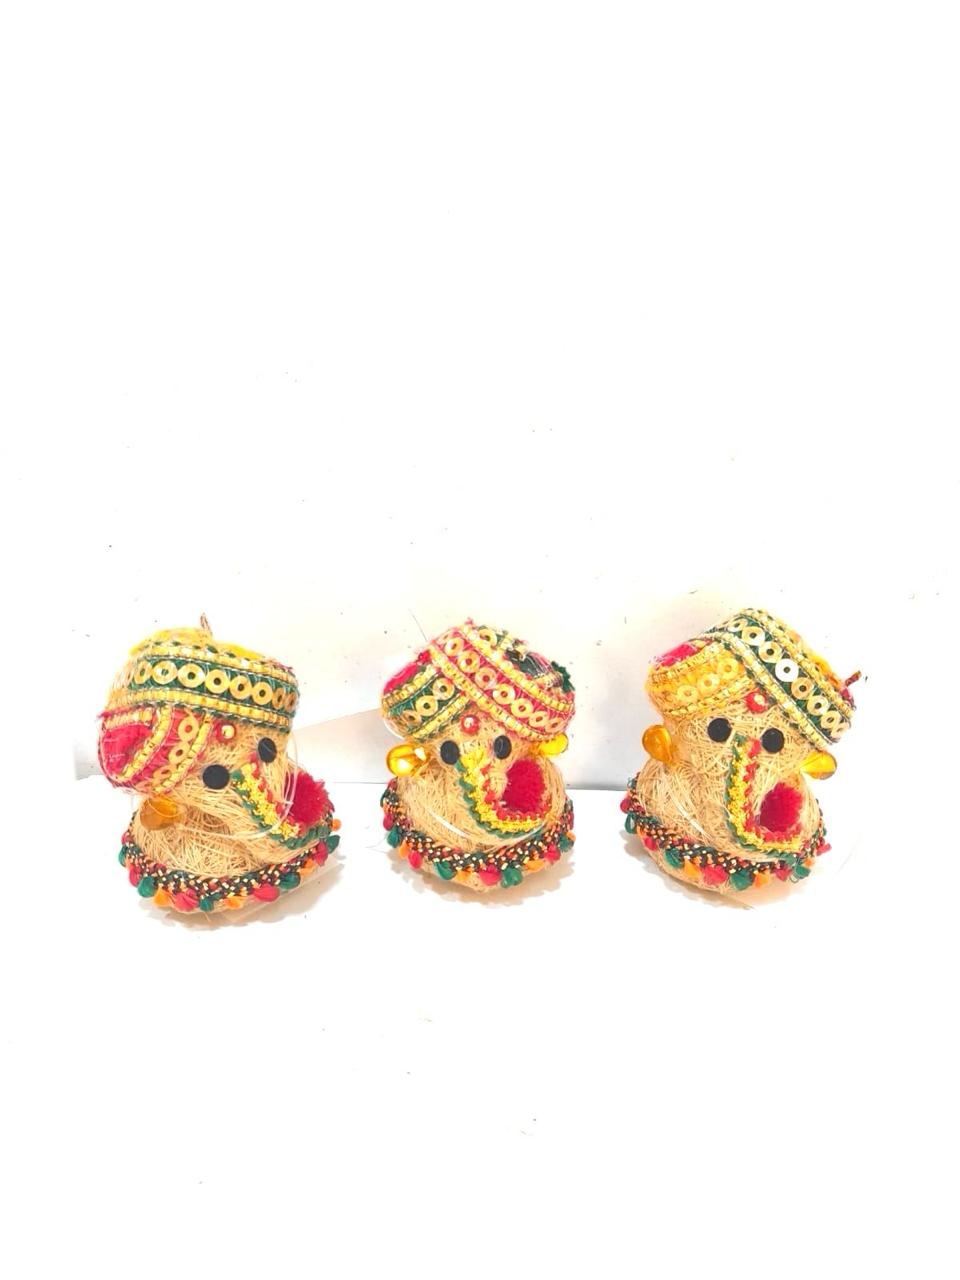 Ganesha Coir Handcrafted With Modak In New Attractive Style By Tamrapatra